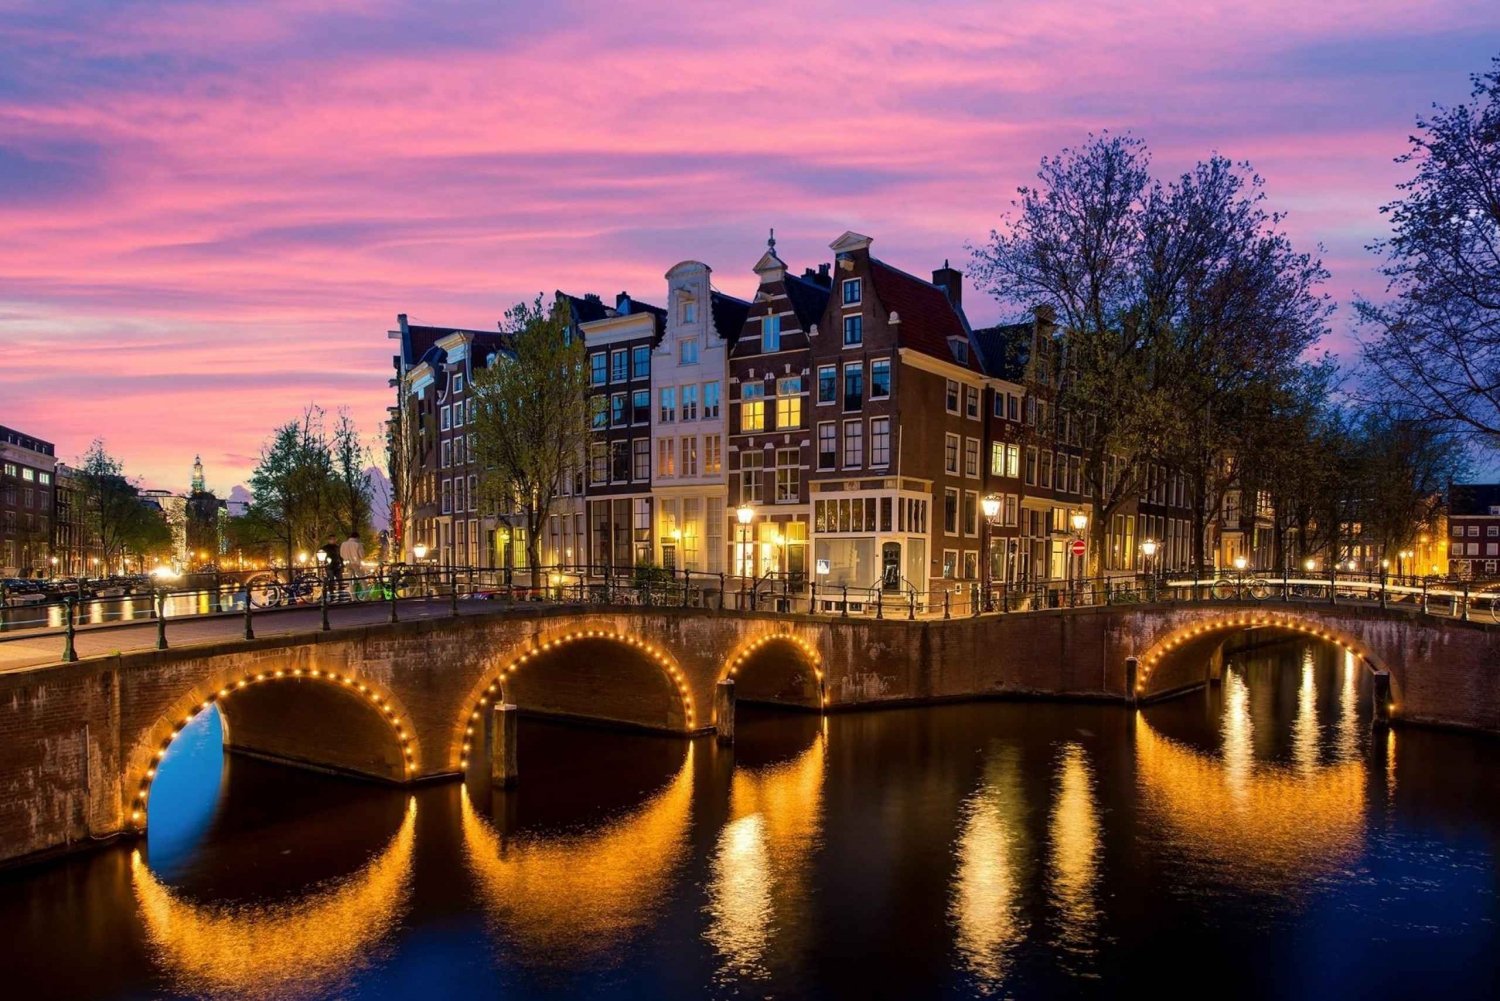 Full Day Private Tour to Amsterdam from Brussels